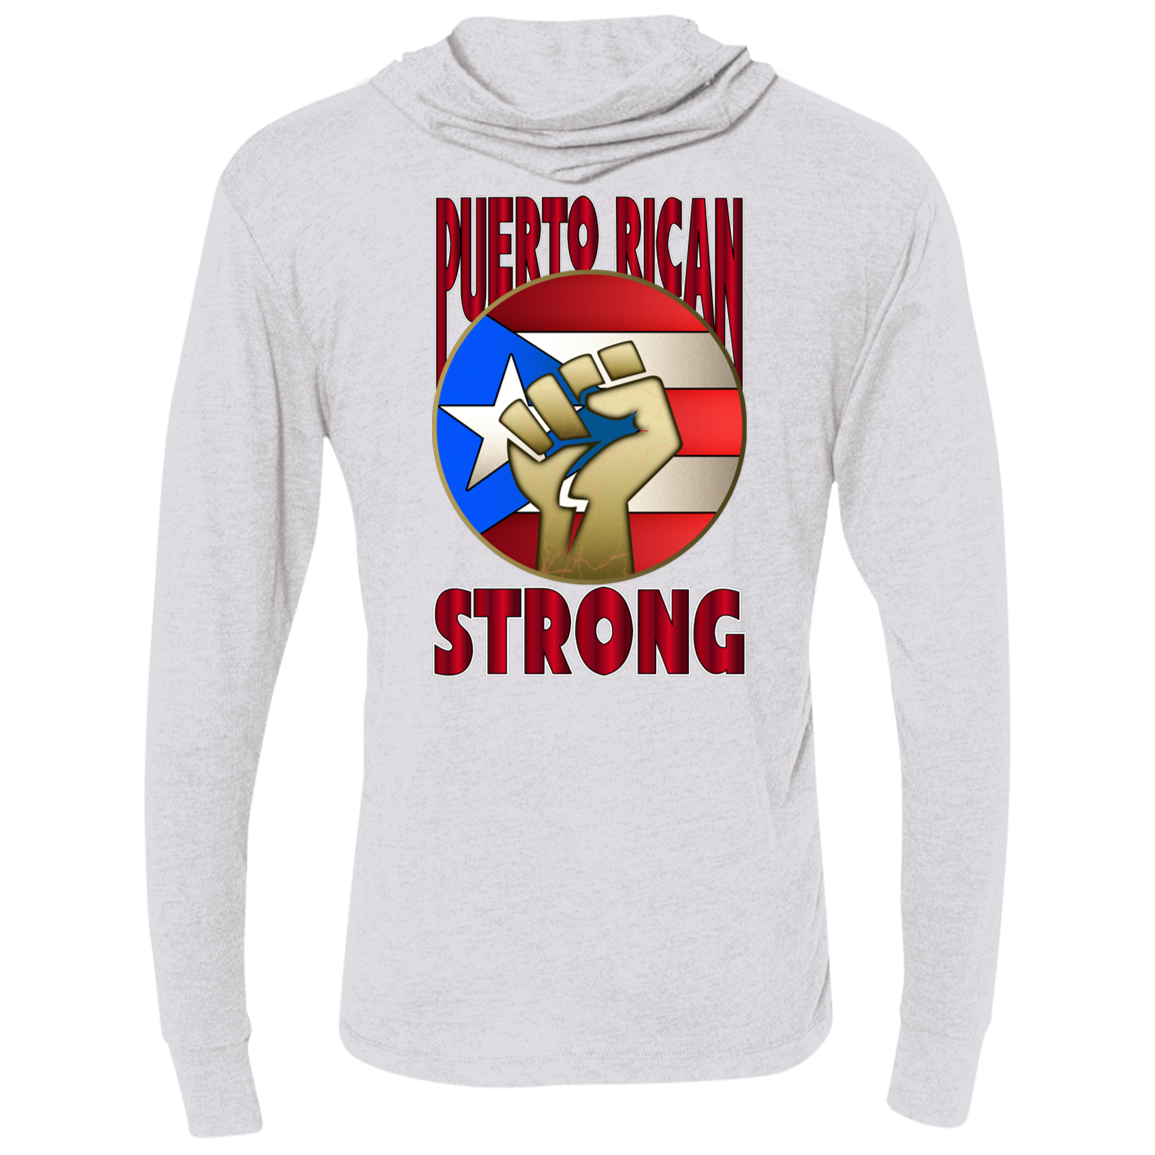 Puerto Rican Strong Unisex  Hooded T-Shirt - Puerto Rican Pride